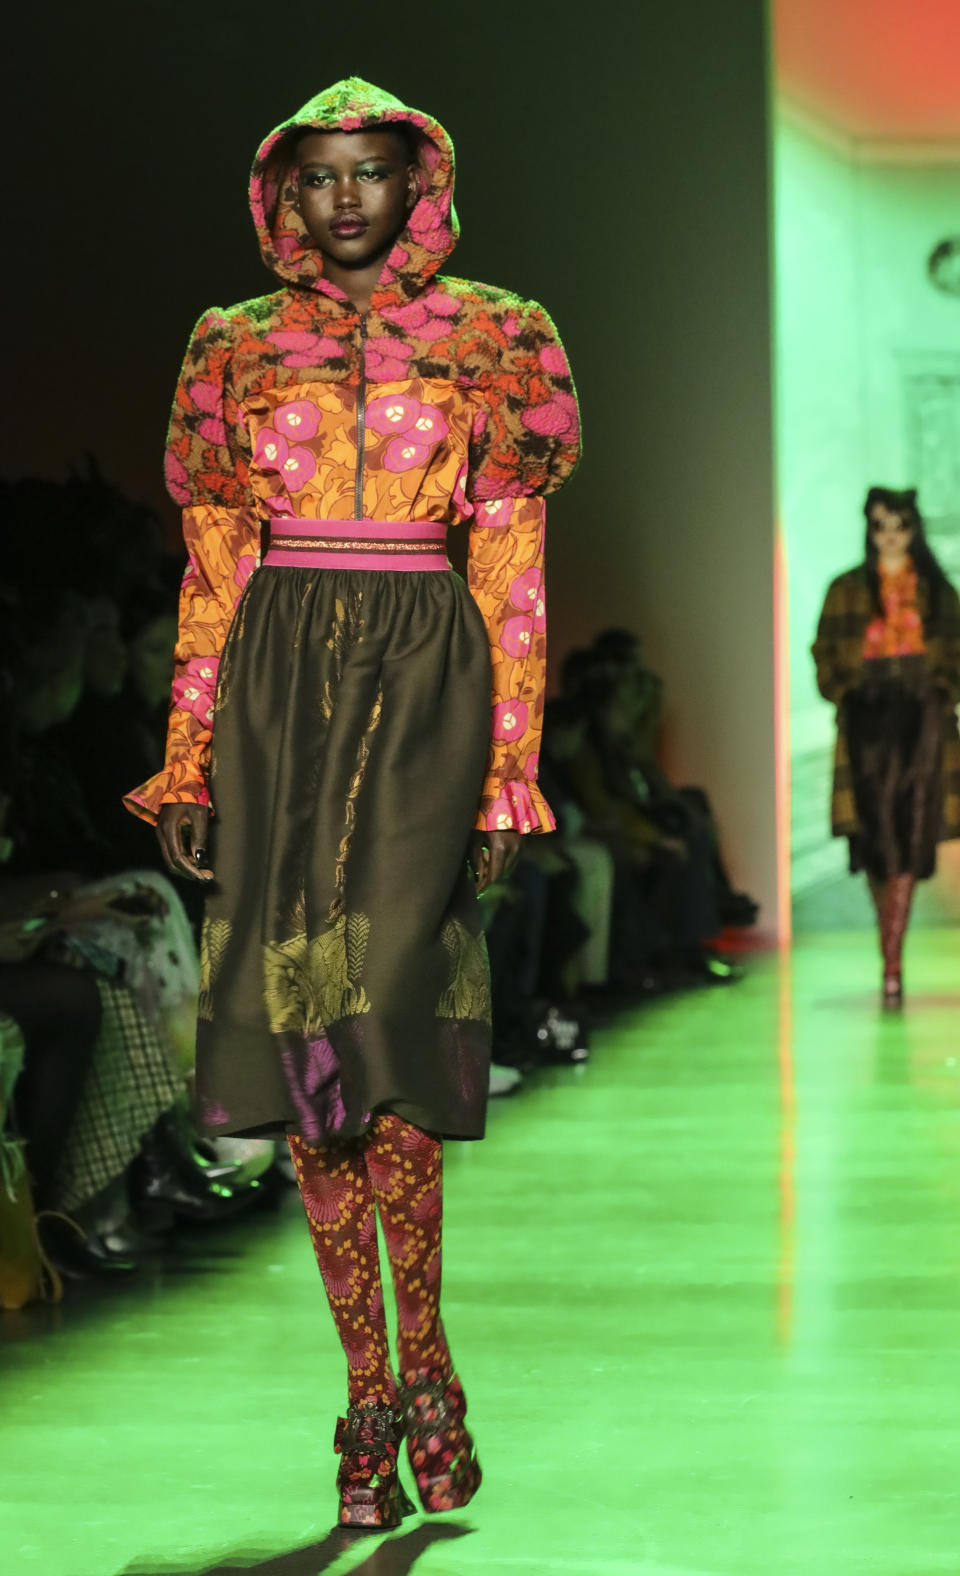 The latest fashion creation from Anna Sui is modeled during New York's Fashion Week, Monday Feb. 10, 2020. (AP Photo/Bebeto Matthews)